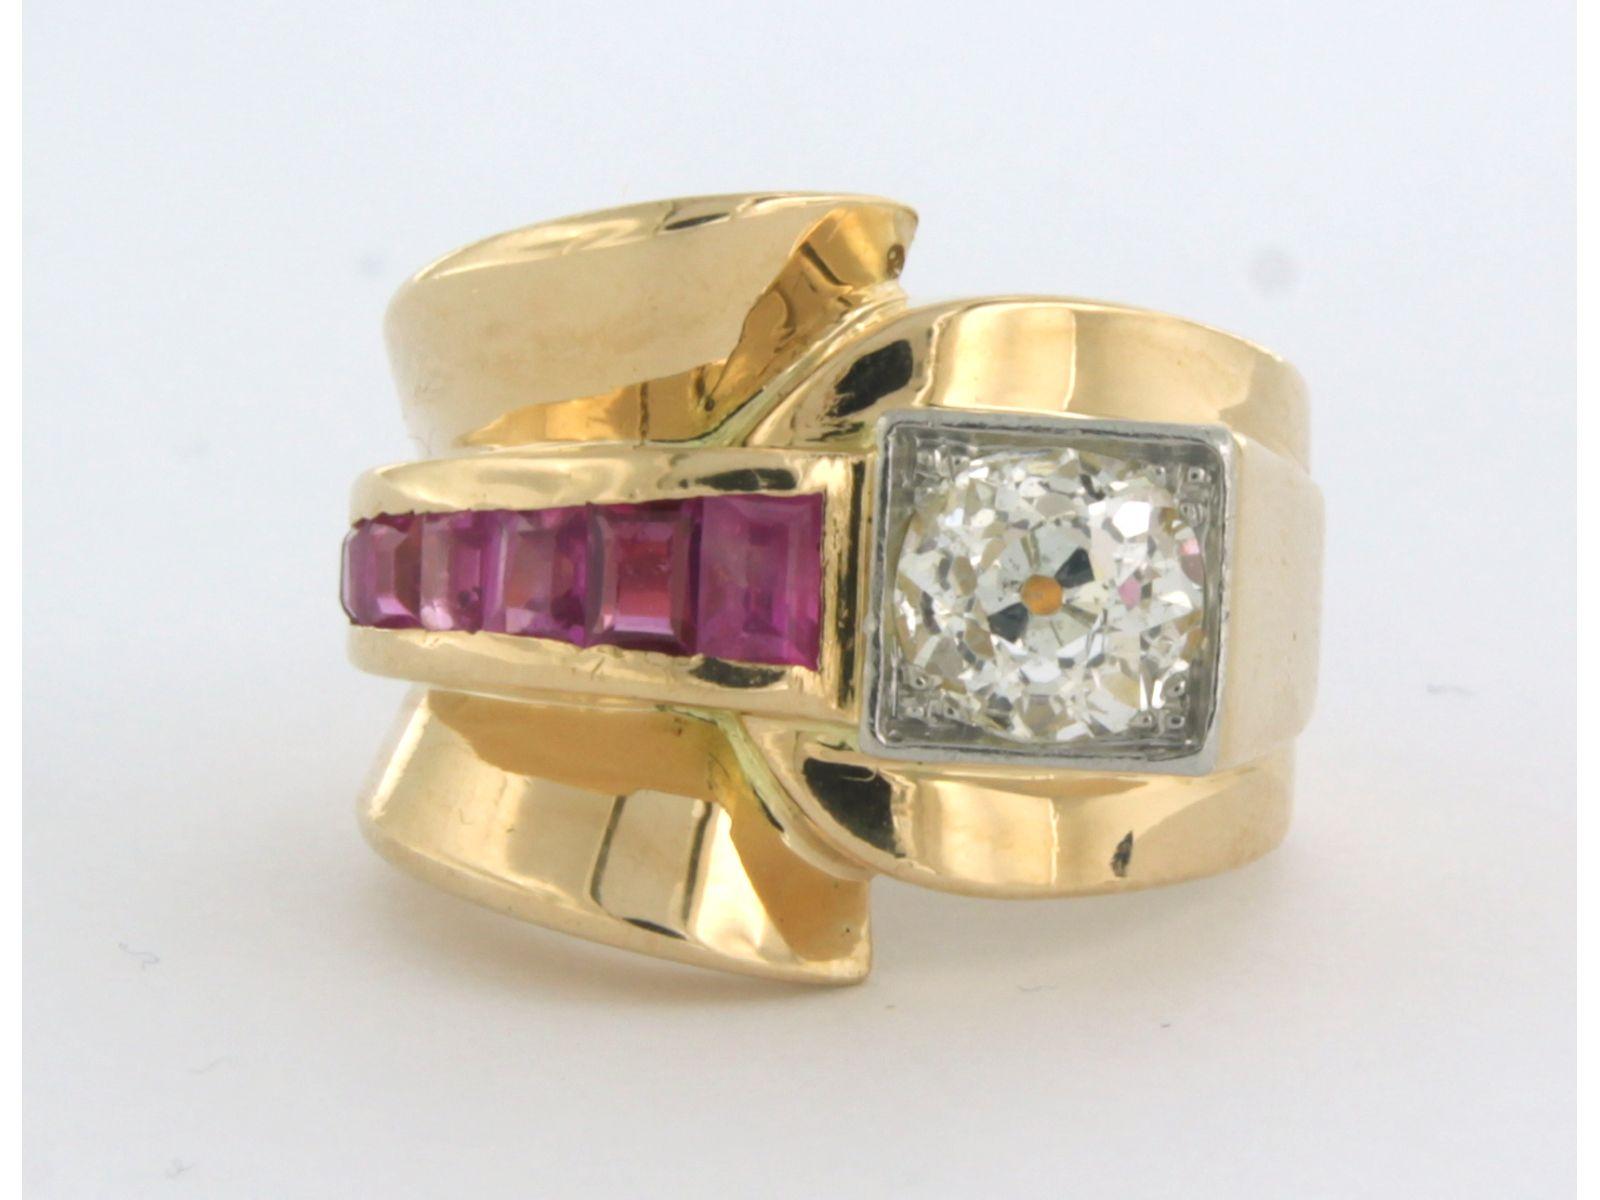 18k bicolour ring set with ruby ​​and old mine cut diamond. 1.30ct – I/J – SI – ring size U.S. 6.5 - EU. 17(53)

detailed description:

The top of the ring is 1.7 cm wide by 4.1 mm high

Ring size U.S. 6.5 - EU. 17(53), rings can be enlarged or